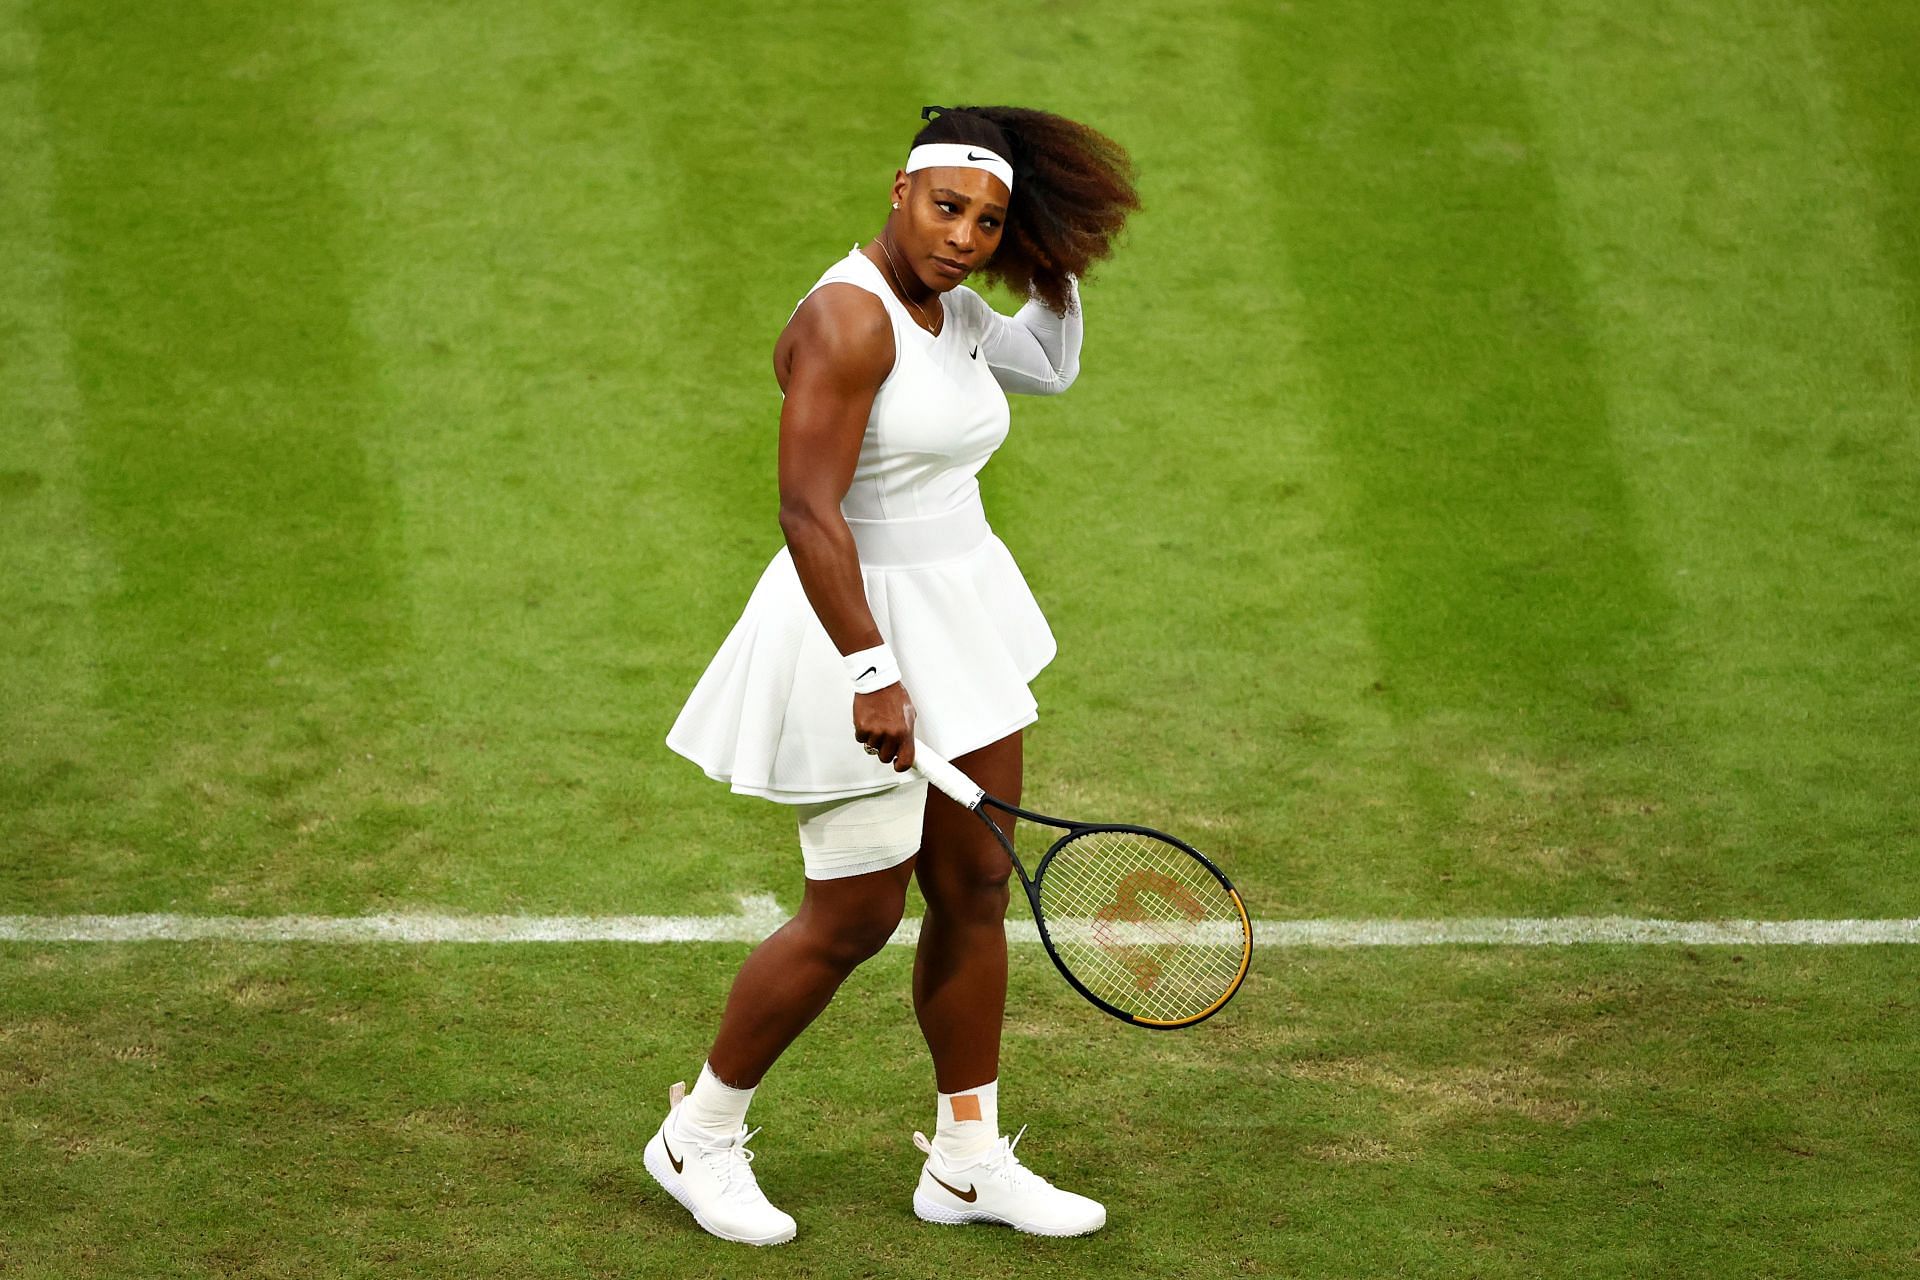 Serena Williams on Day Two: The Championships - Wimbledon 2021